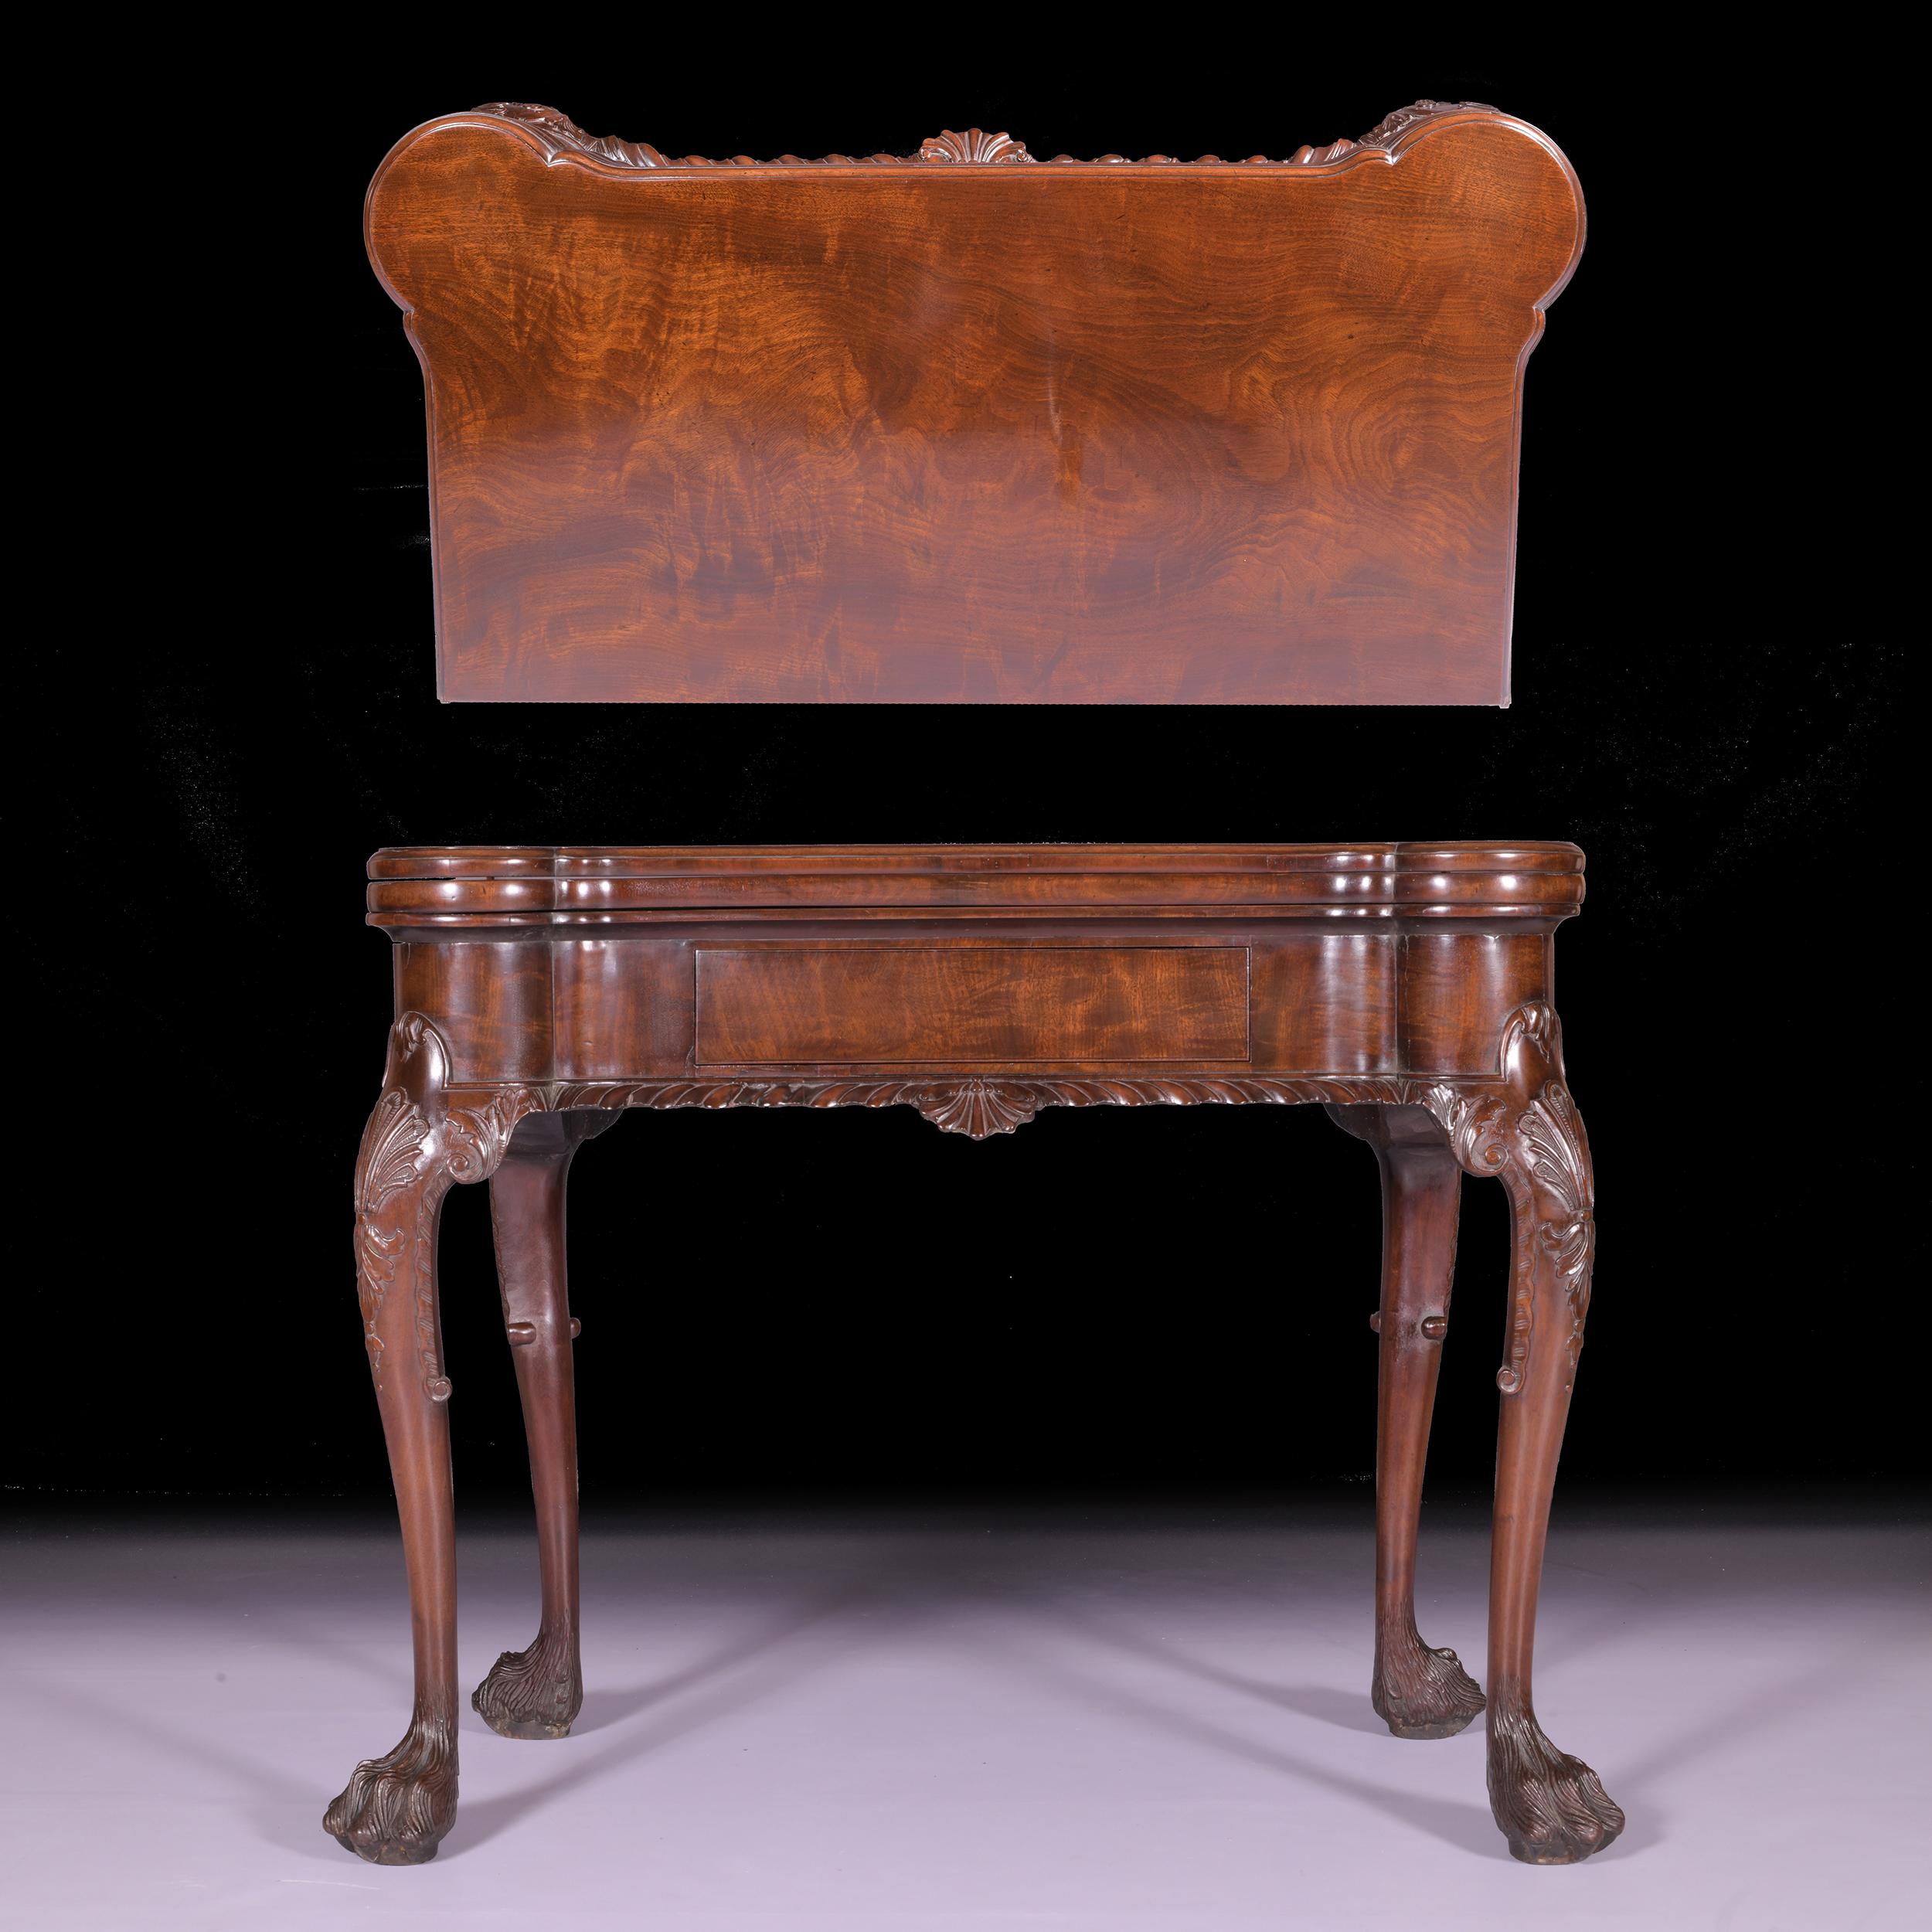 An exceptional 19th century Irish George II style mahogany games and tea table of eared rectangular form, the first hinged top on solid mahogany, the second hinged top enclosing a baize surface with playing counter wells and candle stands, above an